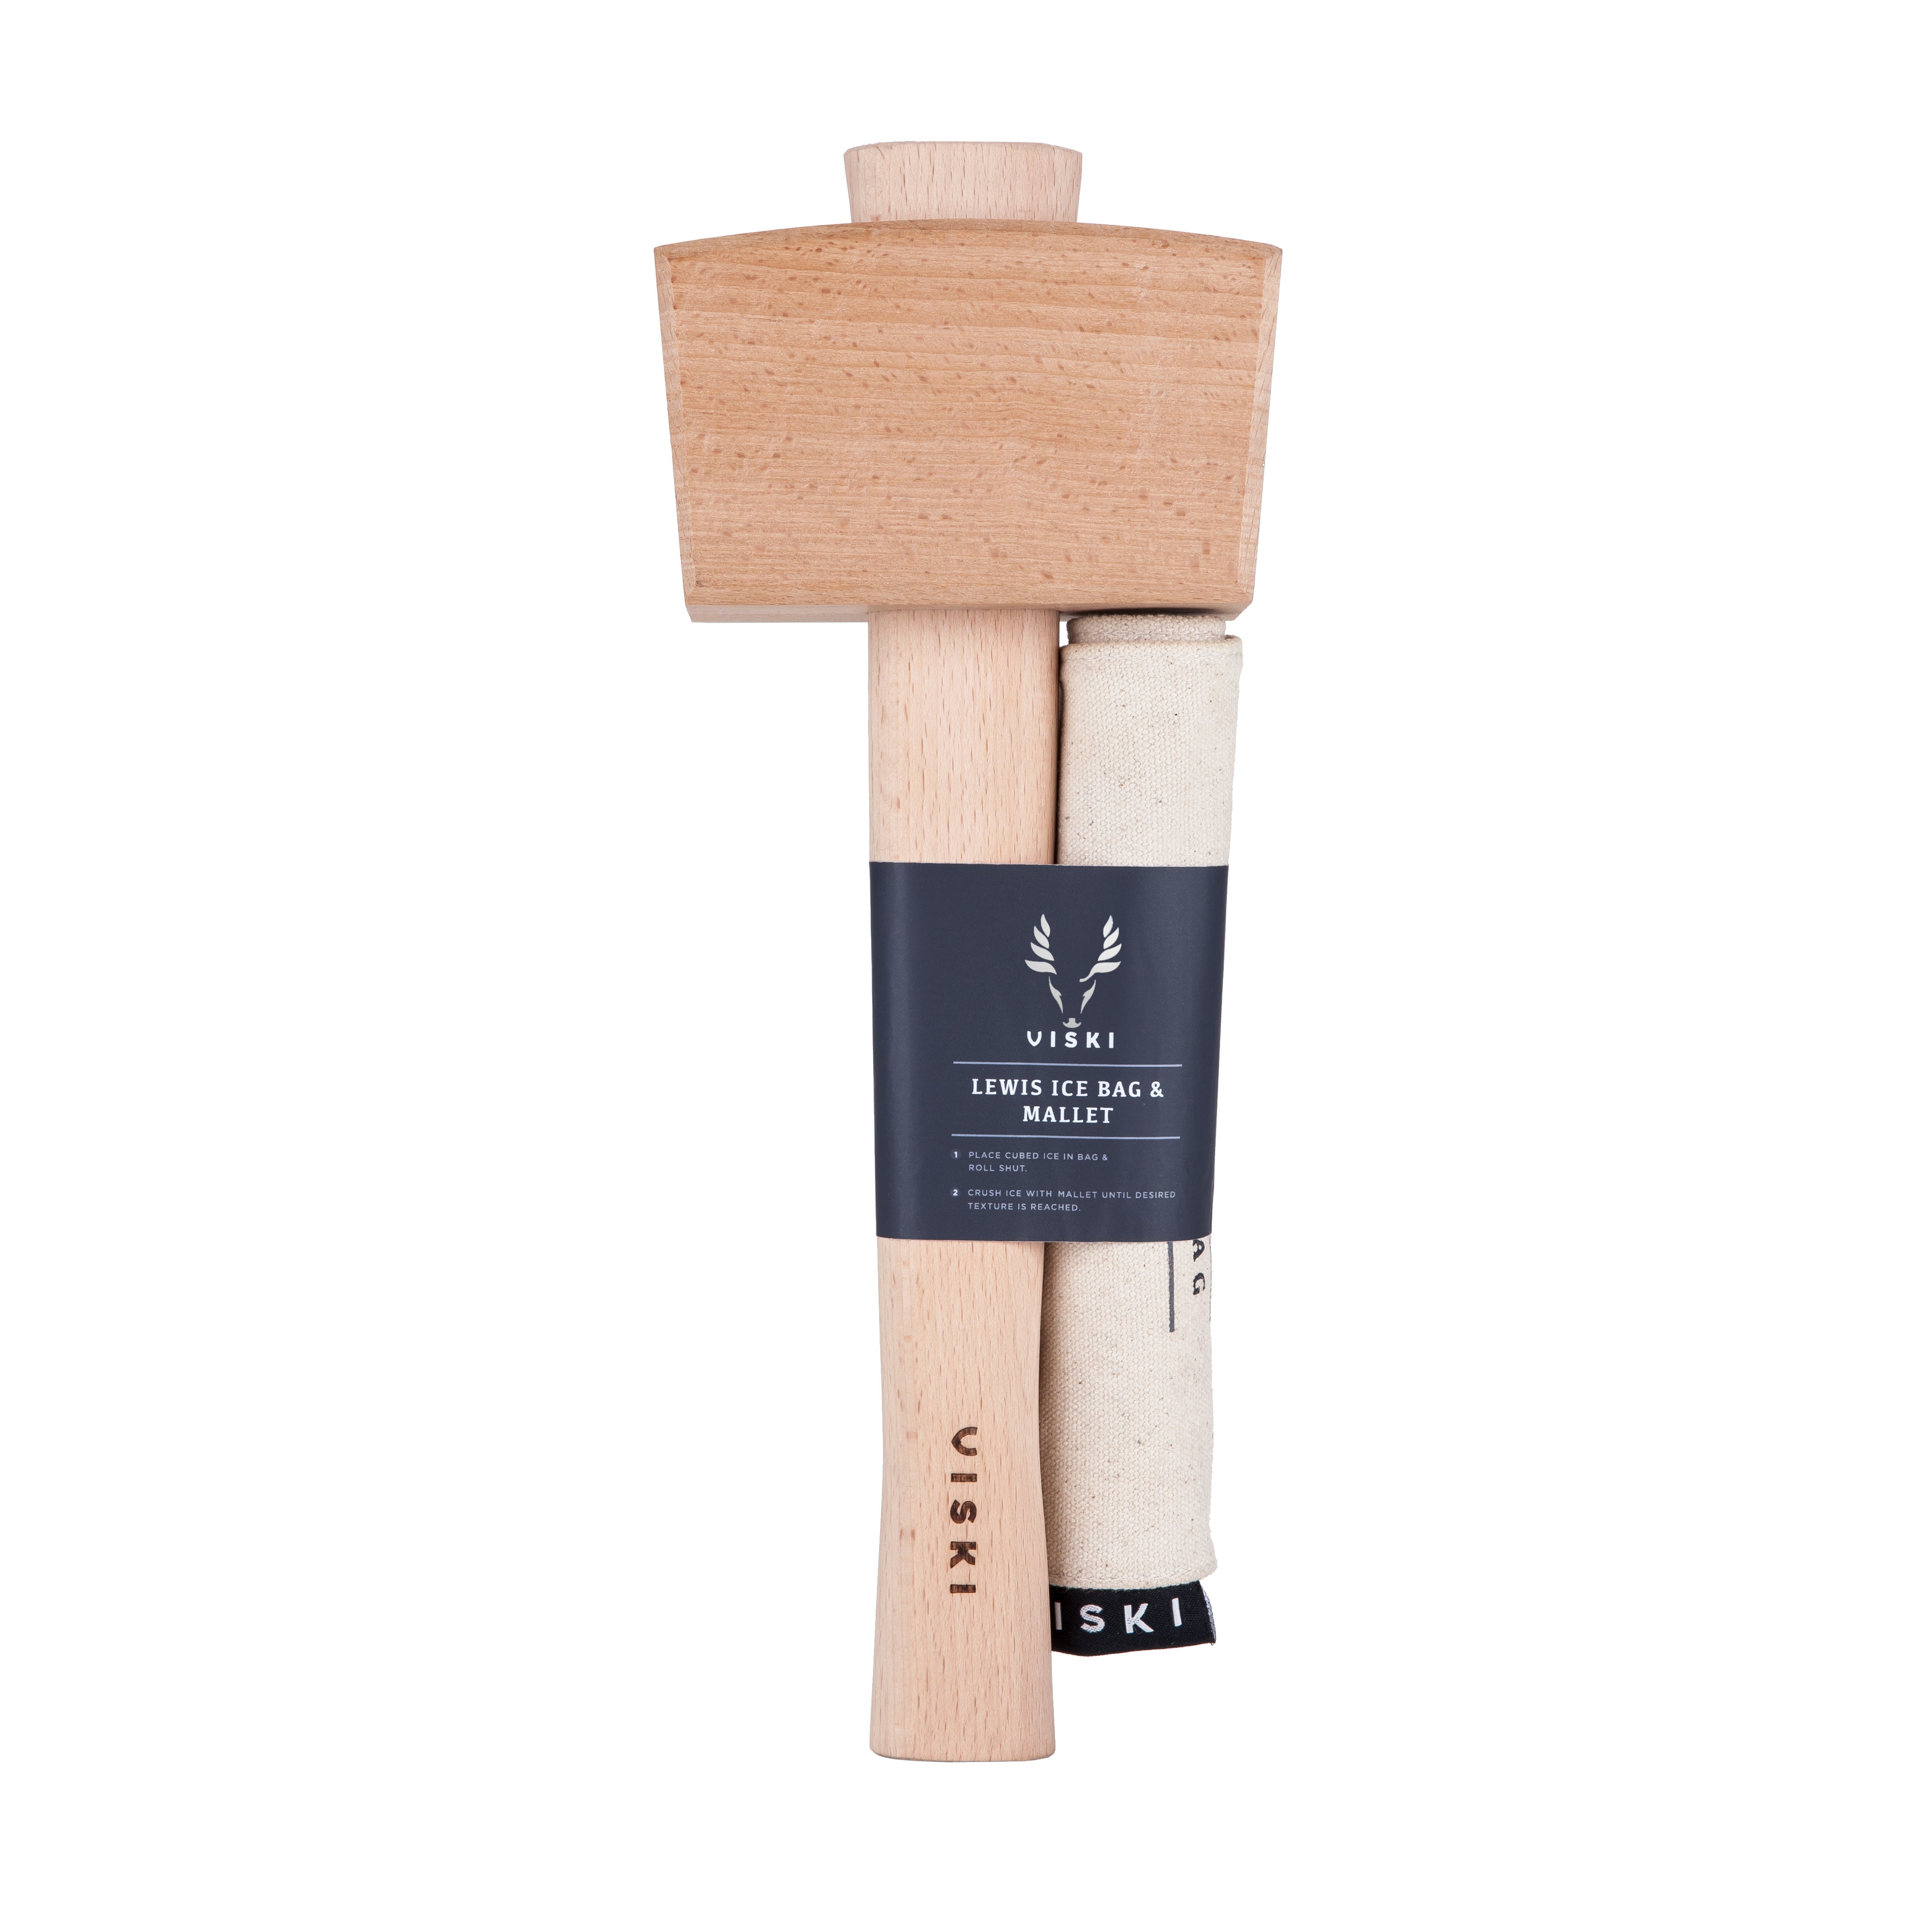 Lewis Ice Bag and Wooden Ice Mallet,Manual Ice Crusher for Breaking  Ice,Thick Canvas Bag,Beech Wooden Mallet,Crushed Ice for Home,Bar Tools  Kitchen